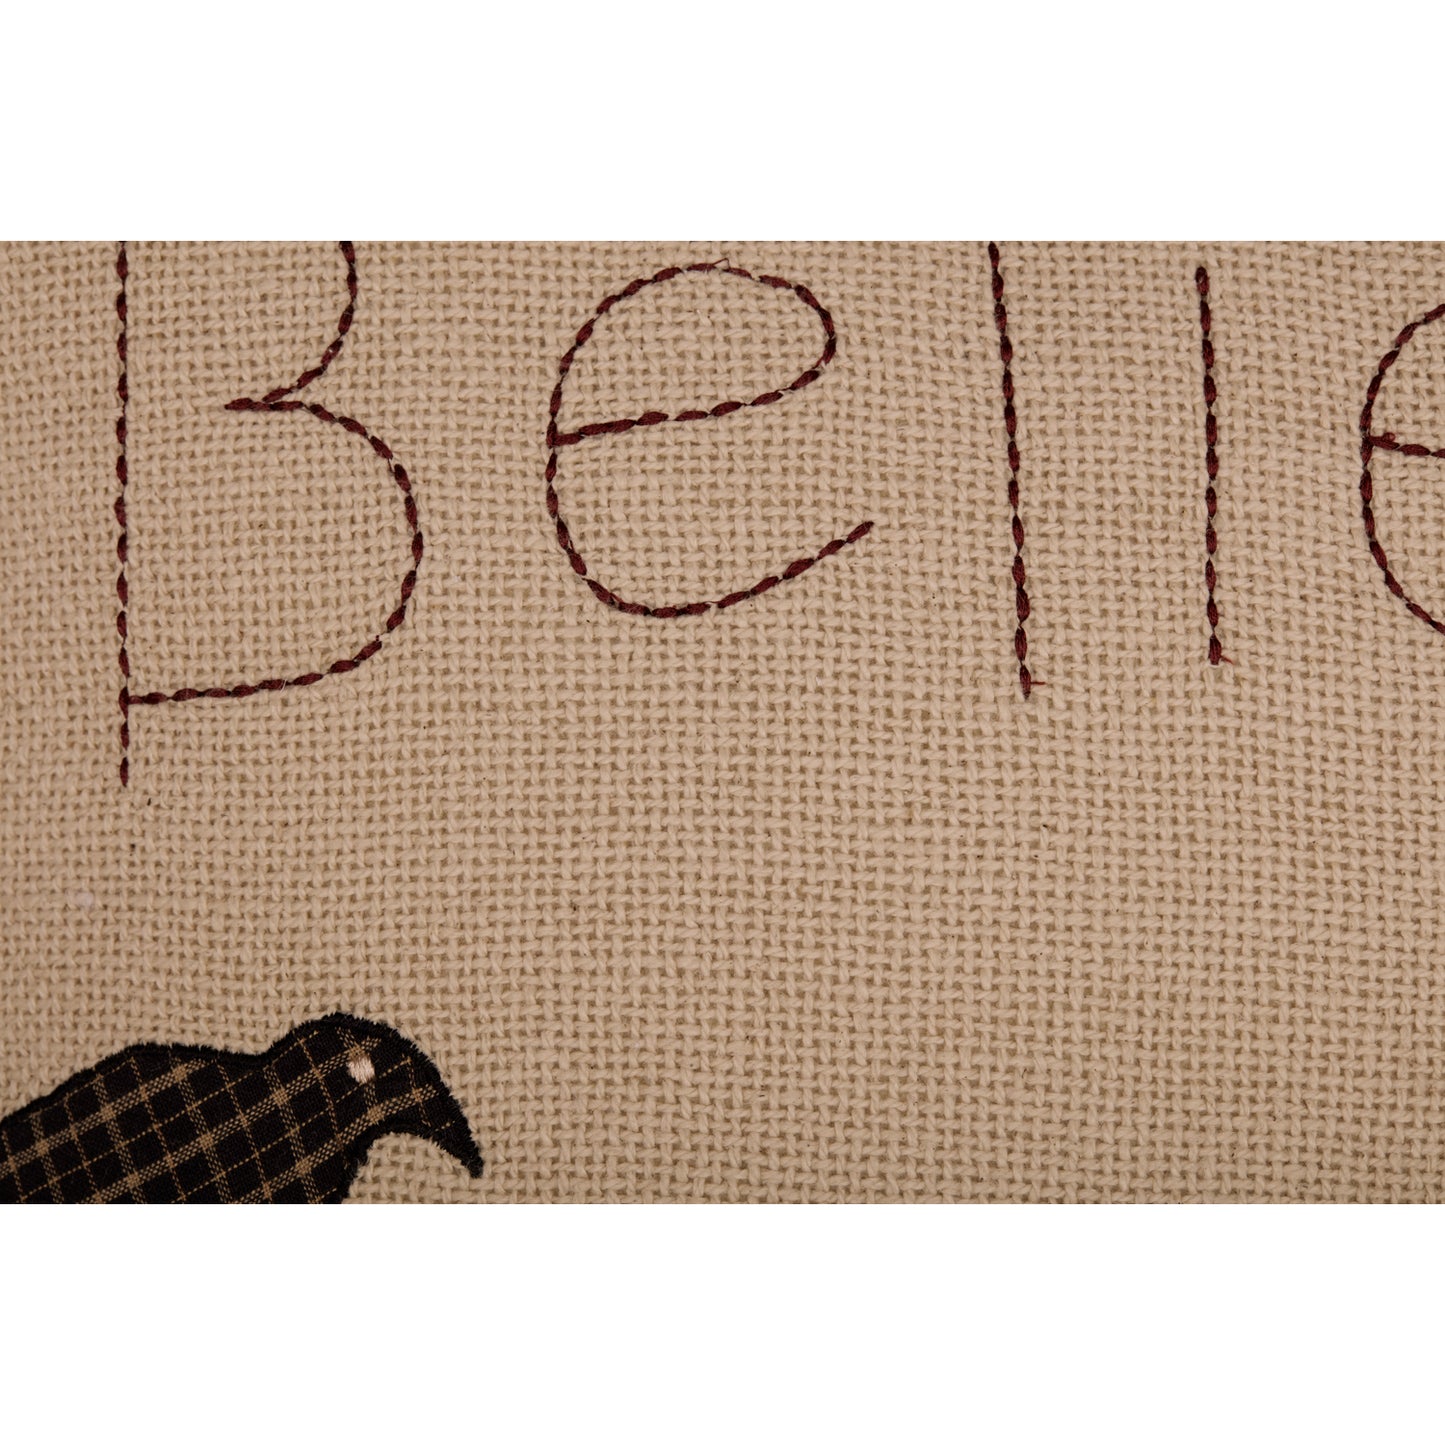 54617-Kettle-Grove-Believe-and-Receive-Pillow-18x18-image-6